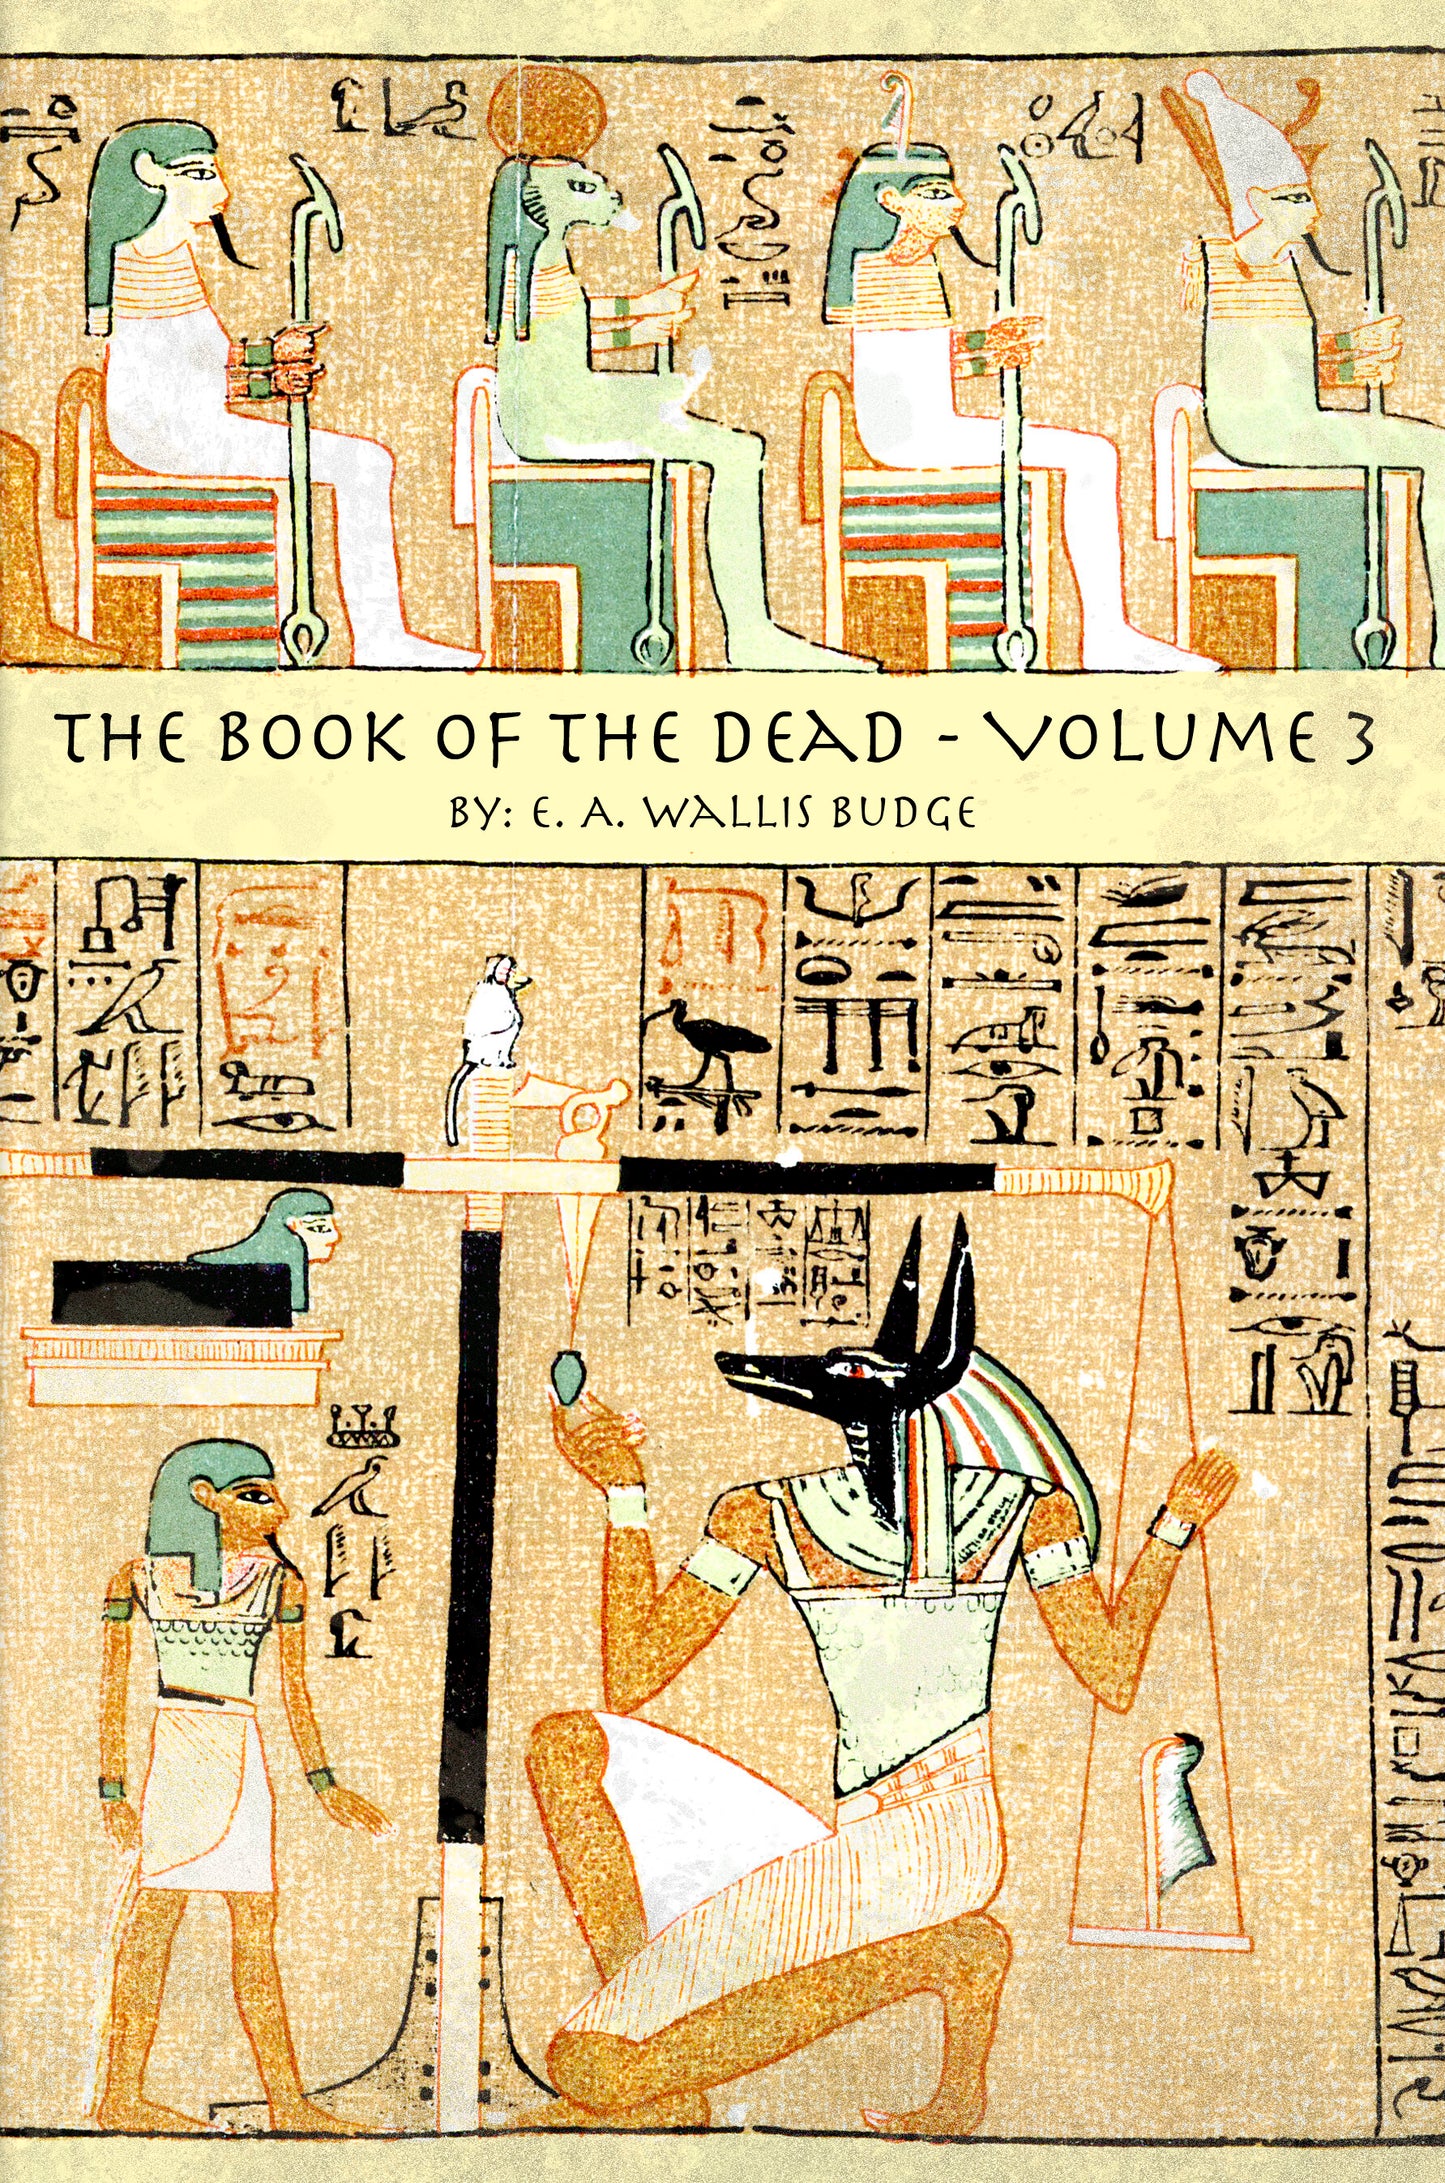 Book of the Dead Volume 3